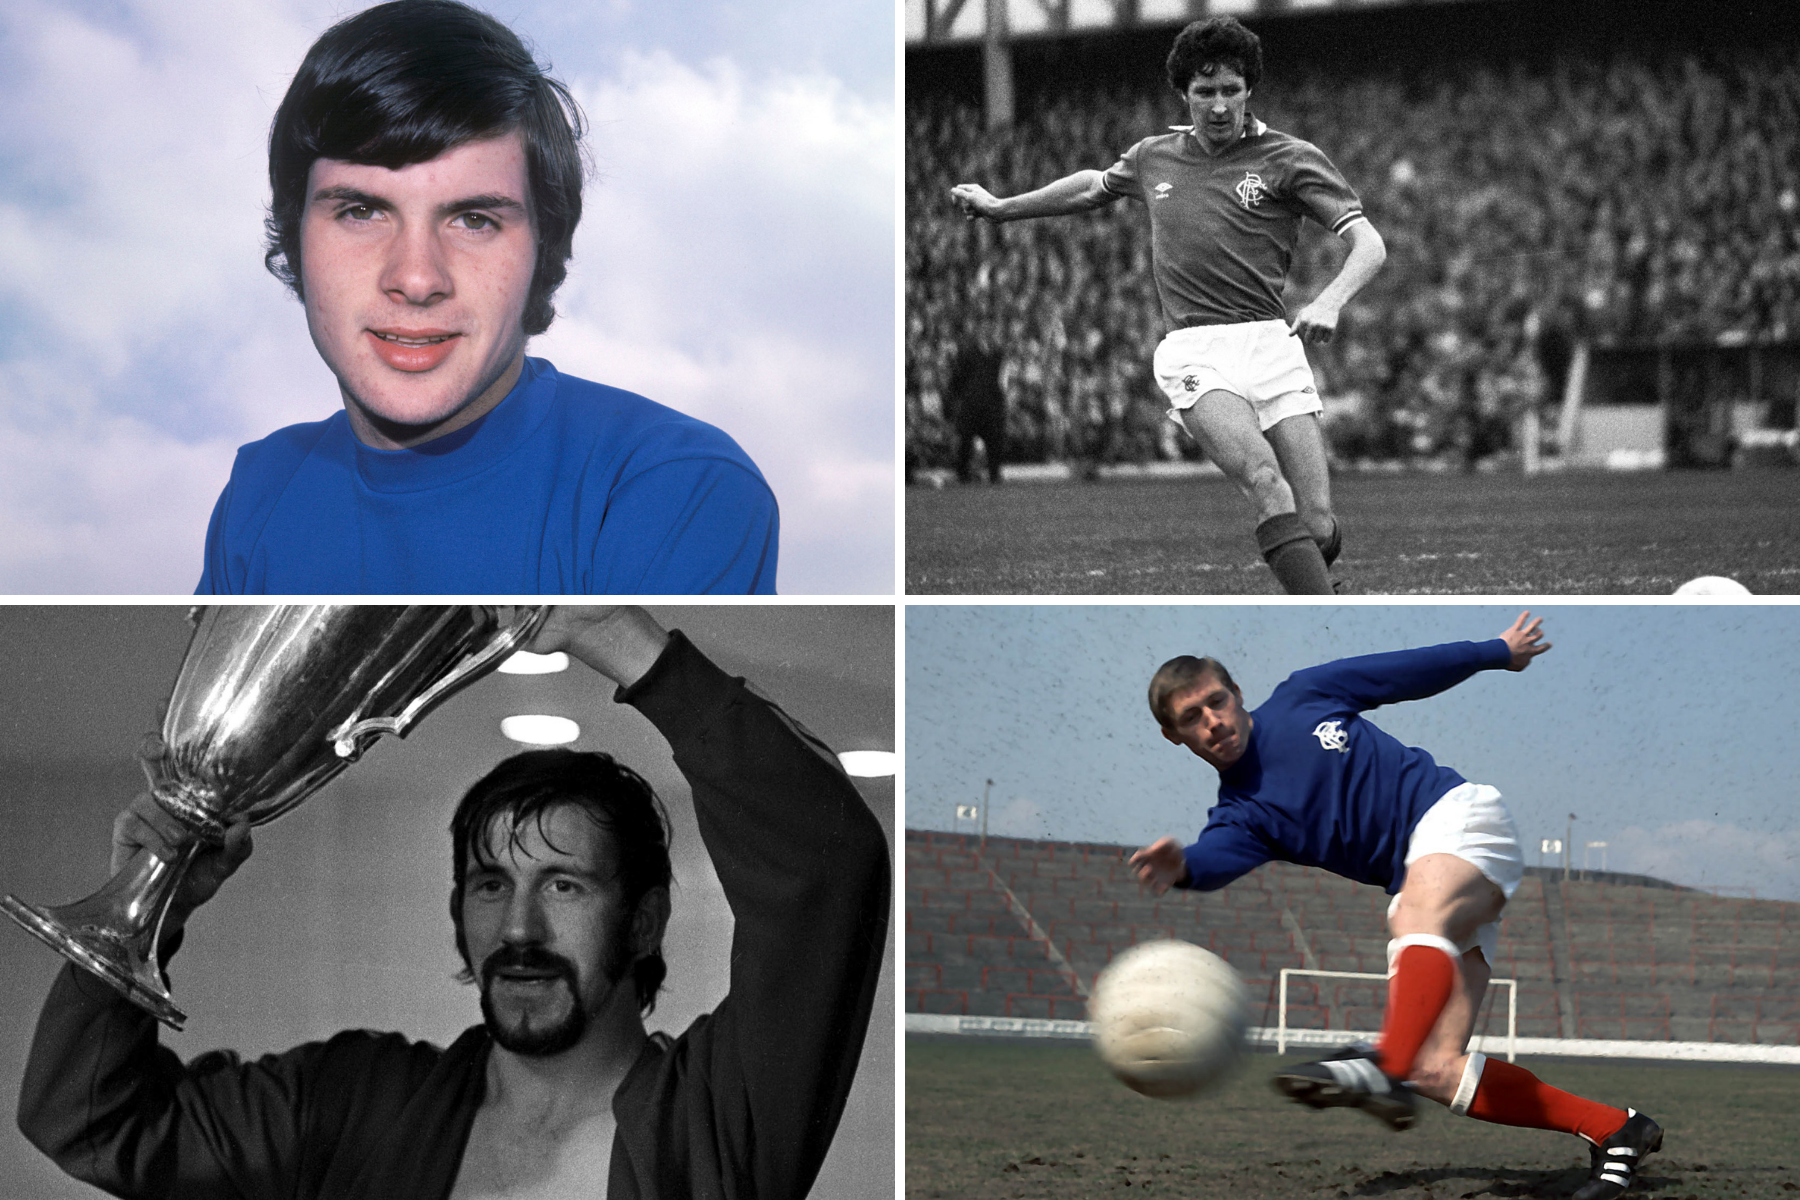 Derek Parlane: Four of the Barcelona Bears scored over 100 goals for Rangers - it was a great era at Ibrox